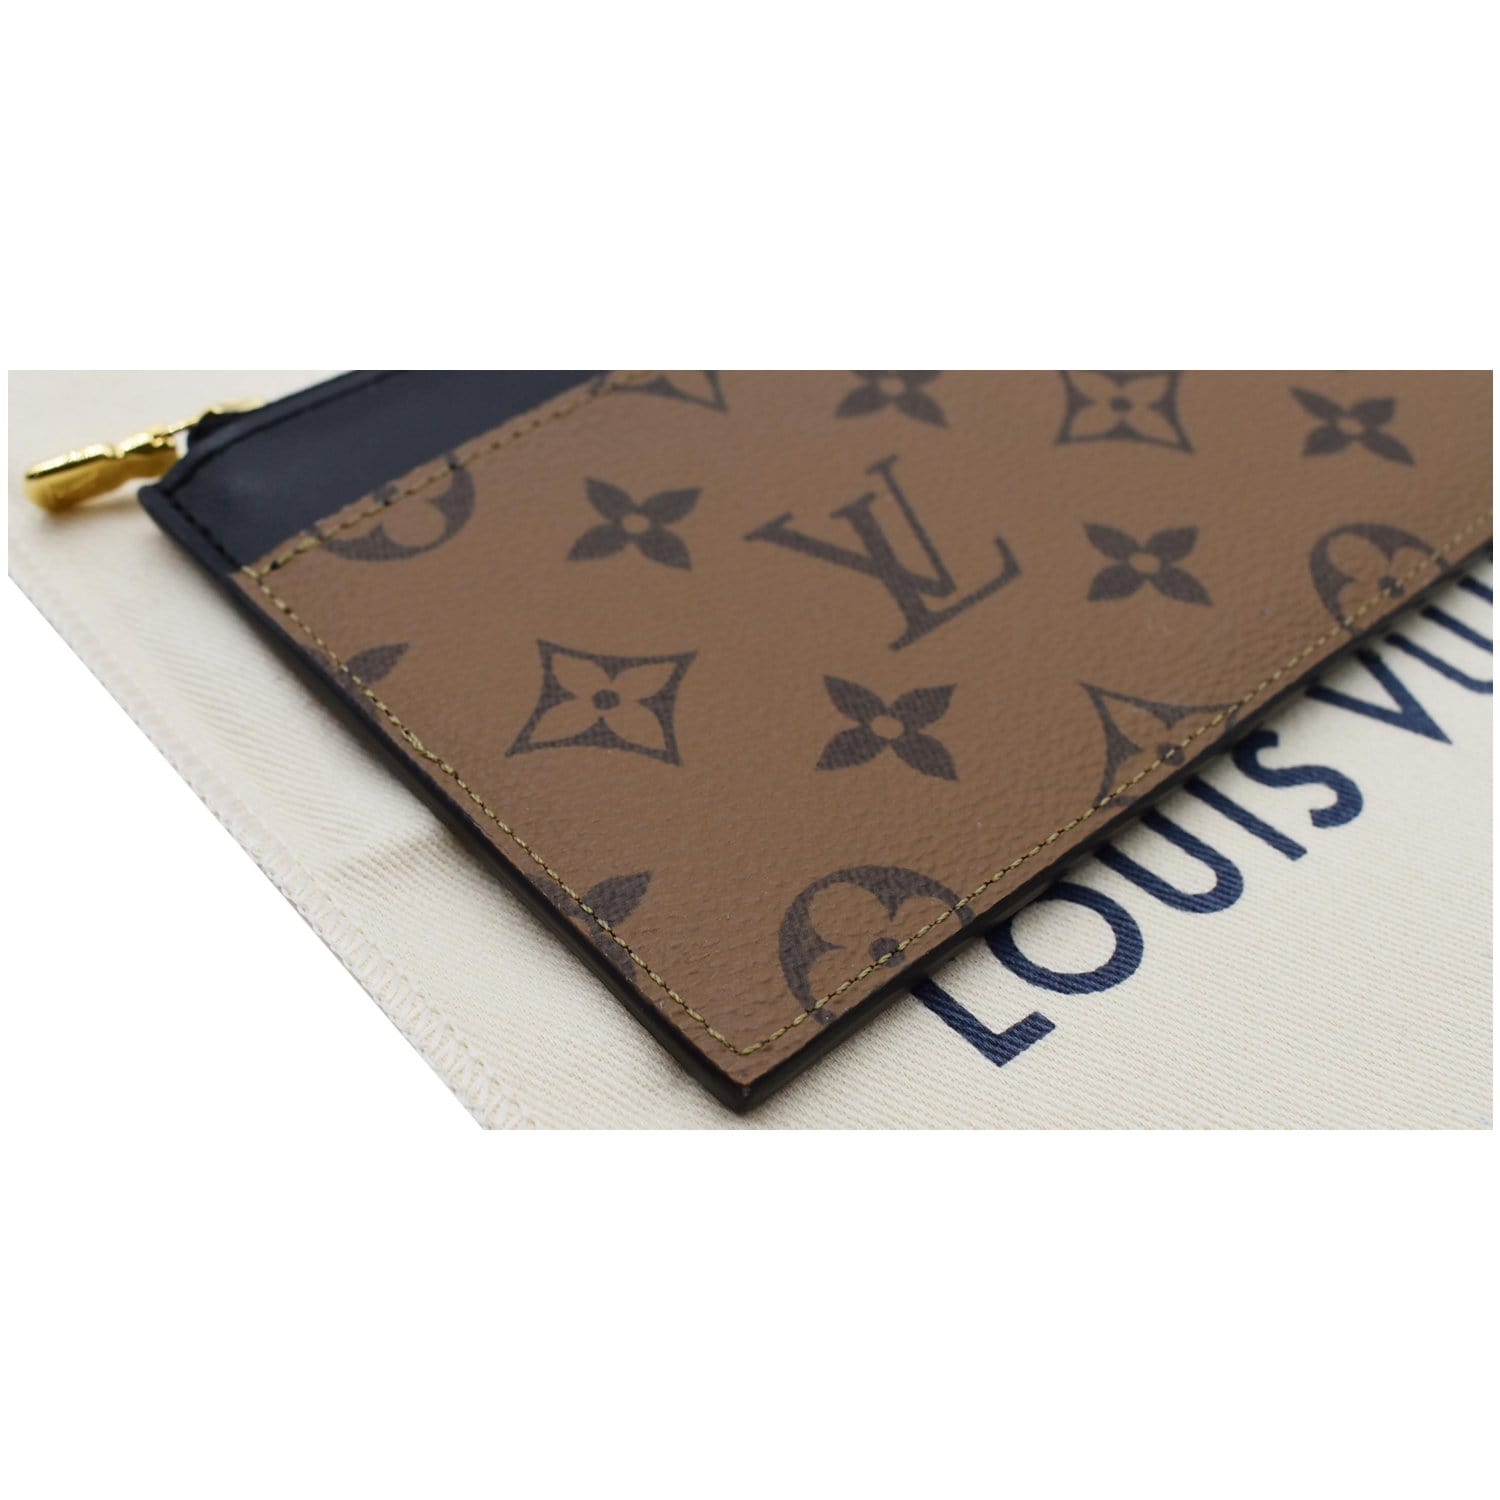 Louis Vuitton slim wallet/purse. This came with a